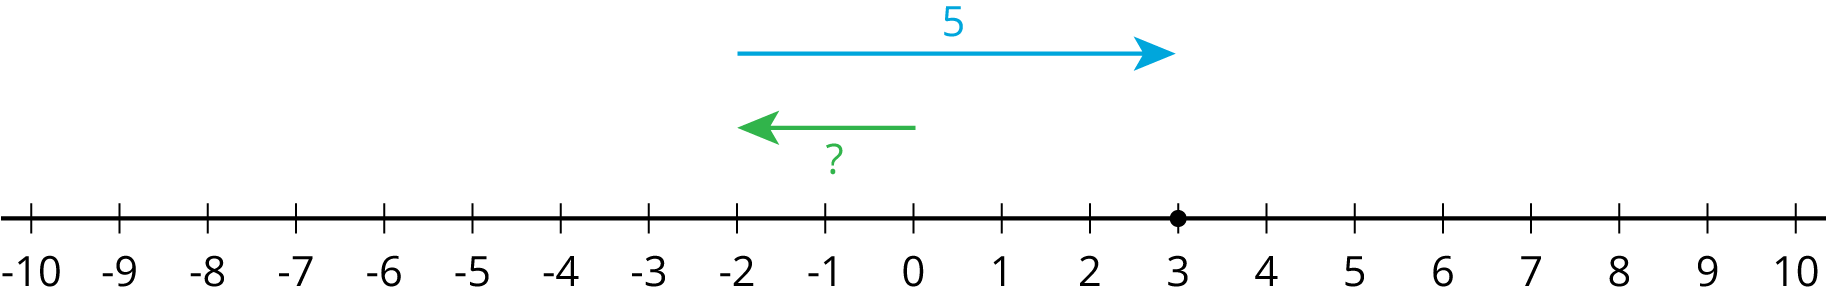 A number line with the numbers negative 10 through 10, indicated. An arrow starts at 0, points to the left, ends at negative 2, and is labeled with a question mark. A second arrow starts at negative 2, points to the right, ends at 3, and is labeled "5". There is a solid dot indicated at 3.